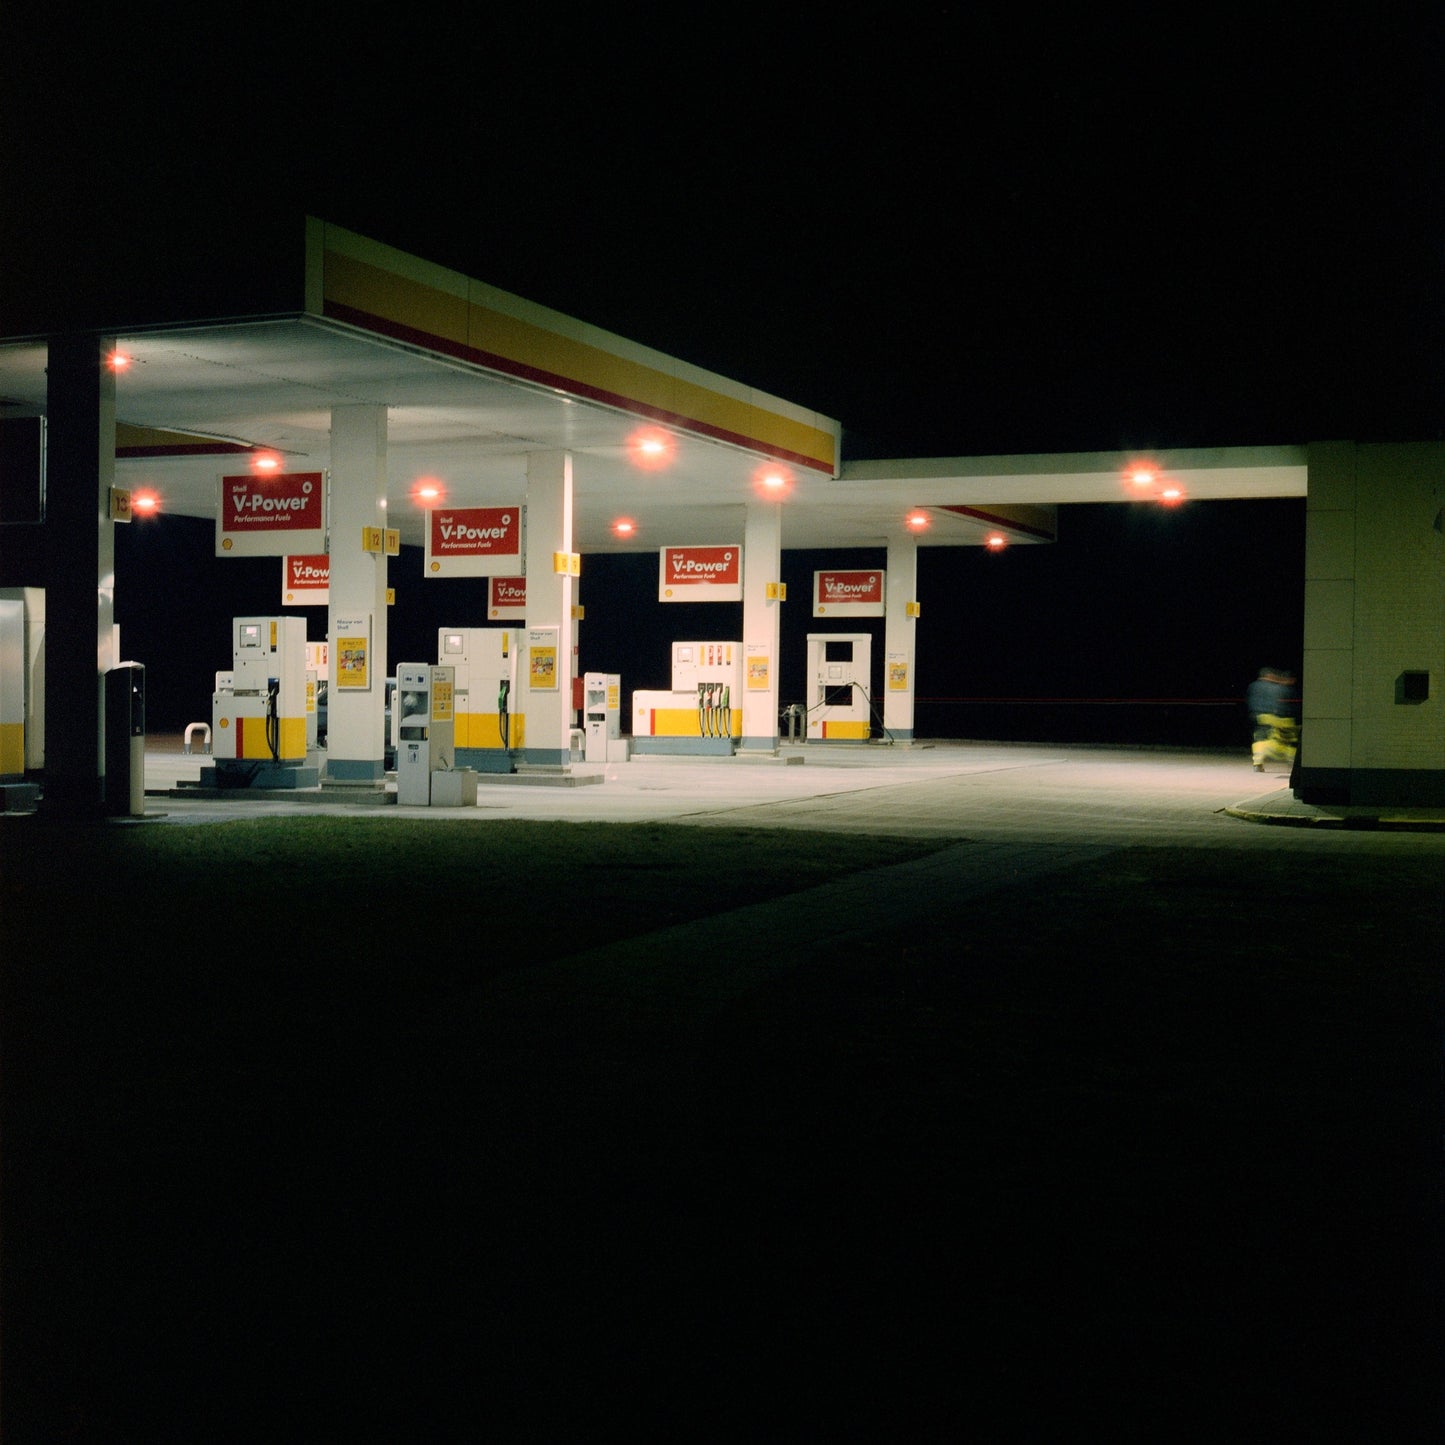 The artwork 'Exterior #5' by Jildo Tim Hof displaying a quiet gas station at night with as seen from the outside